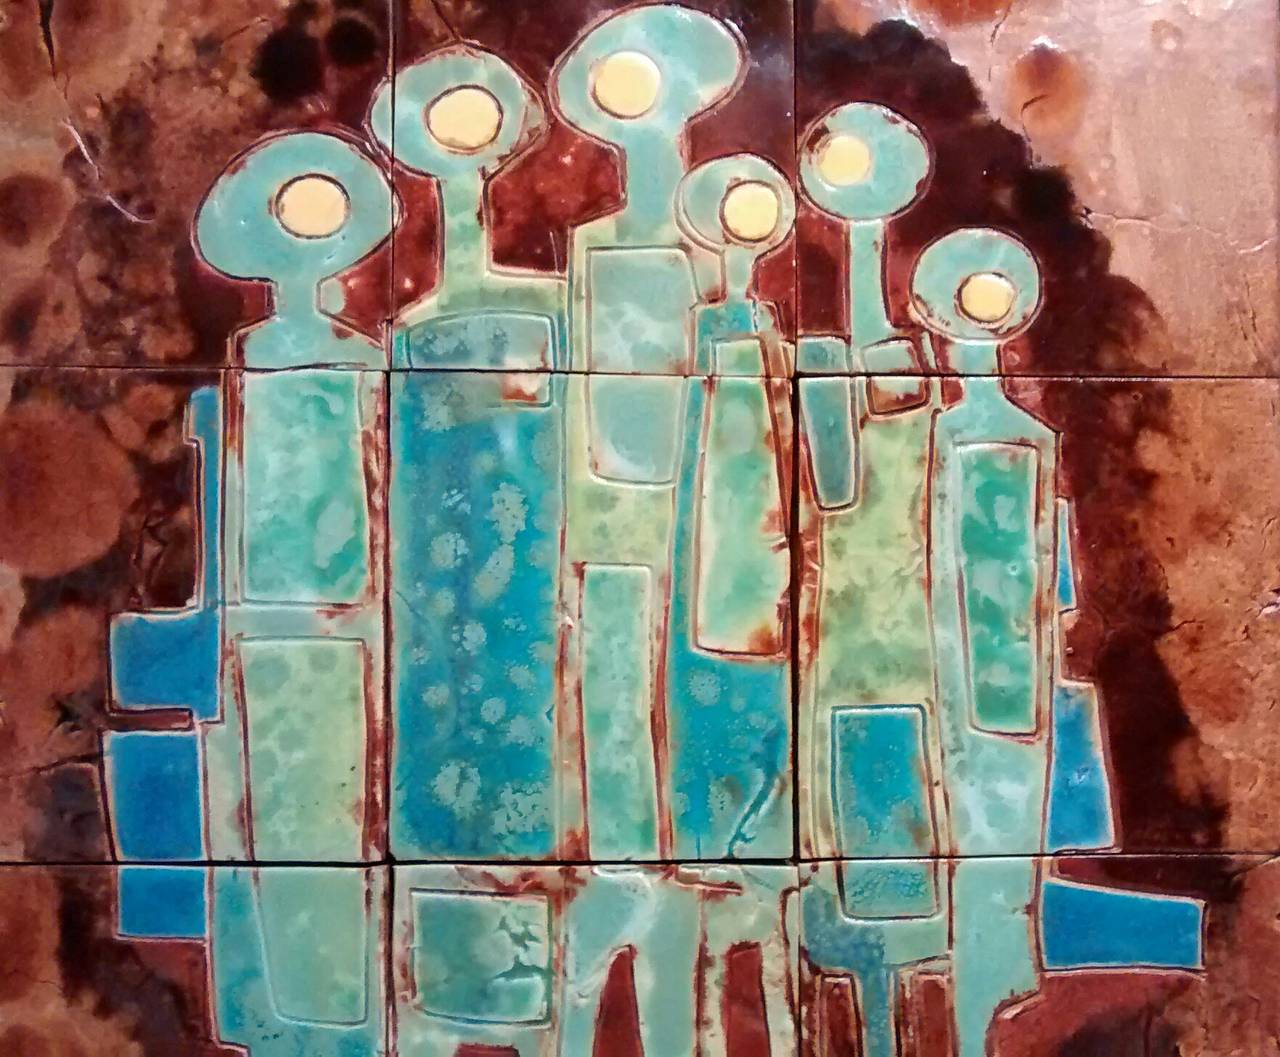 Super nine-tile wall hanging by modernist ceramic artist Mary Blakley (1914-2004). 

This work, dated 1974, depicts a group of humanoid figures in what is a very strong, modern aesthetic. 

Below is an excerpt from an online biography on the